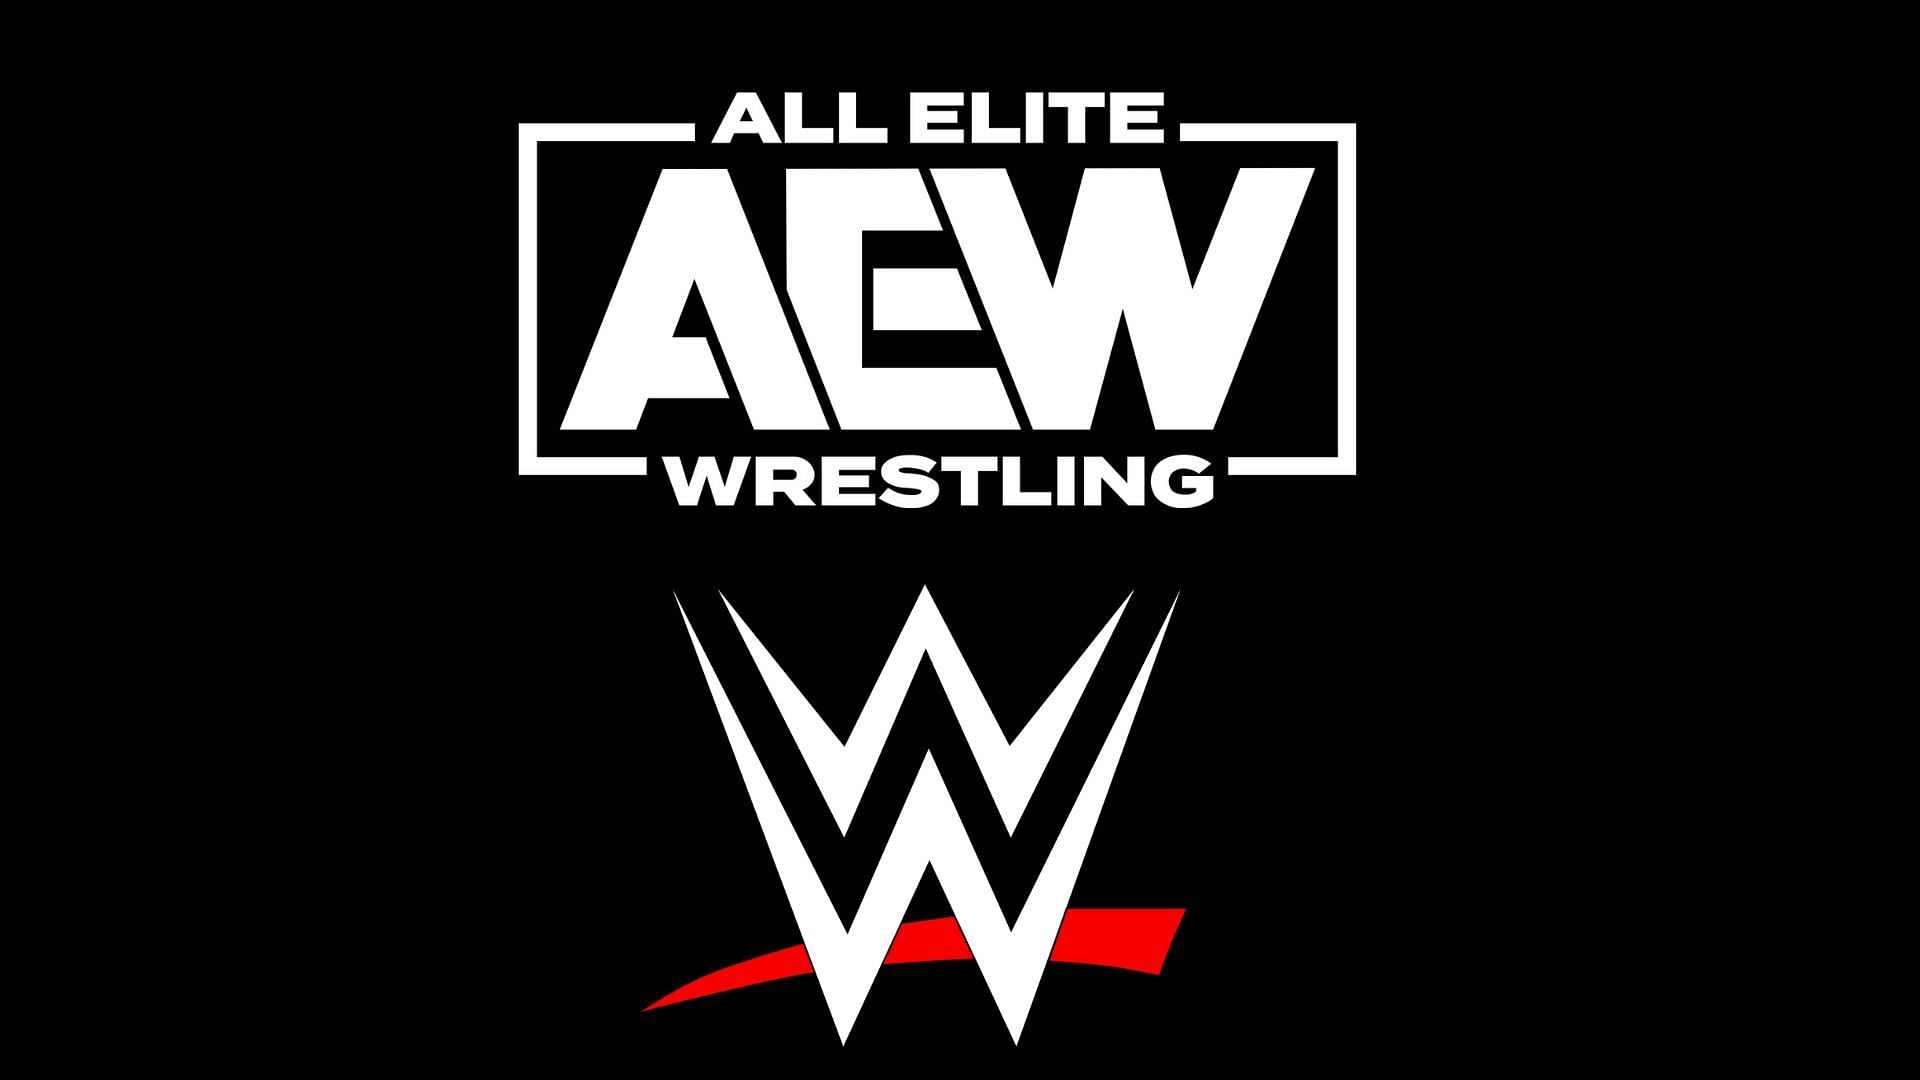 Could this star have worsened the &quot;war&quot; between AEW and WWE?